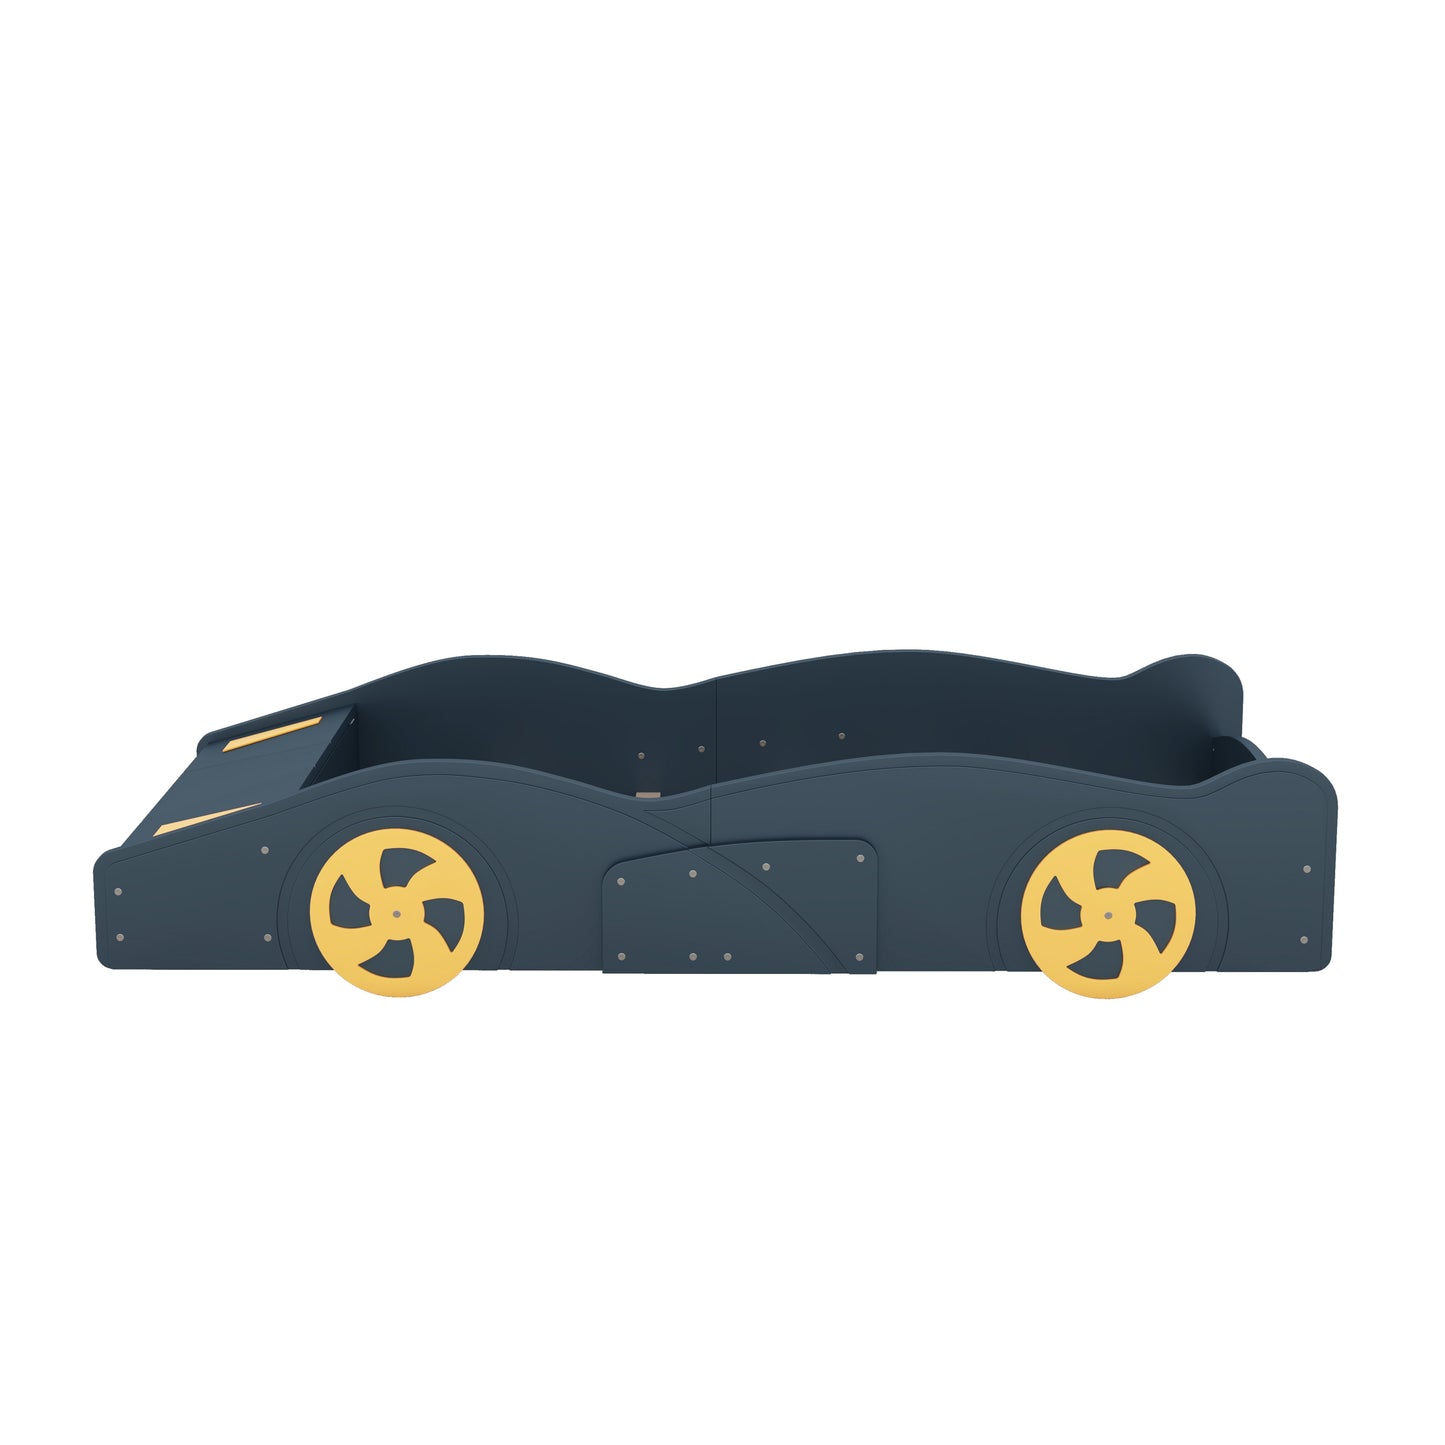 Twin Size Race Car-Shaped Platform Bed with Wheels and Storage, Dark Blue+Yellow